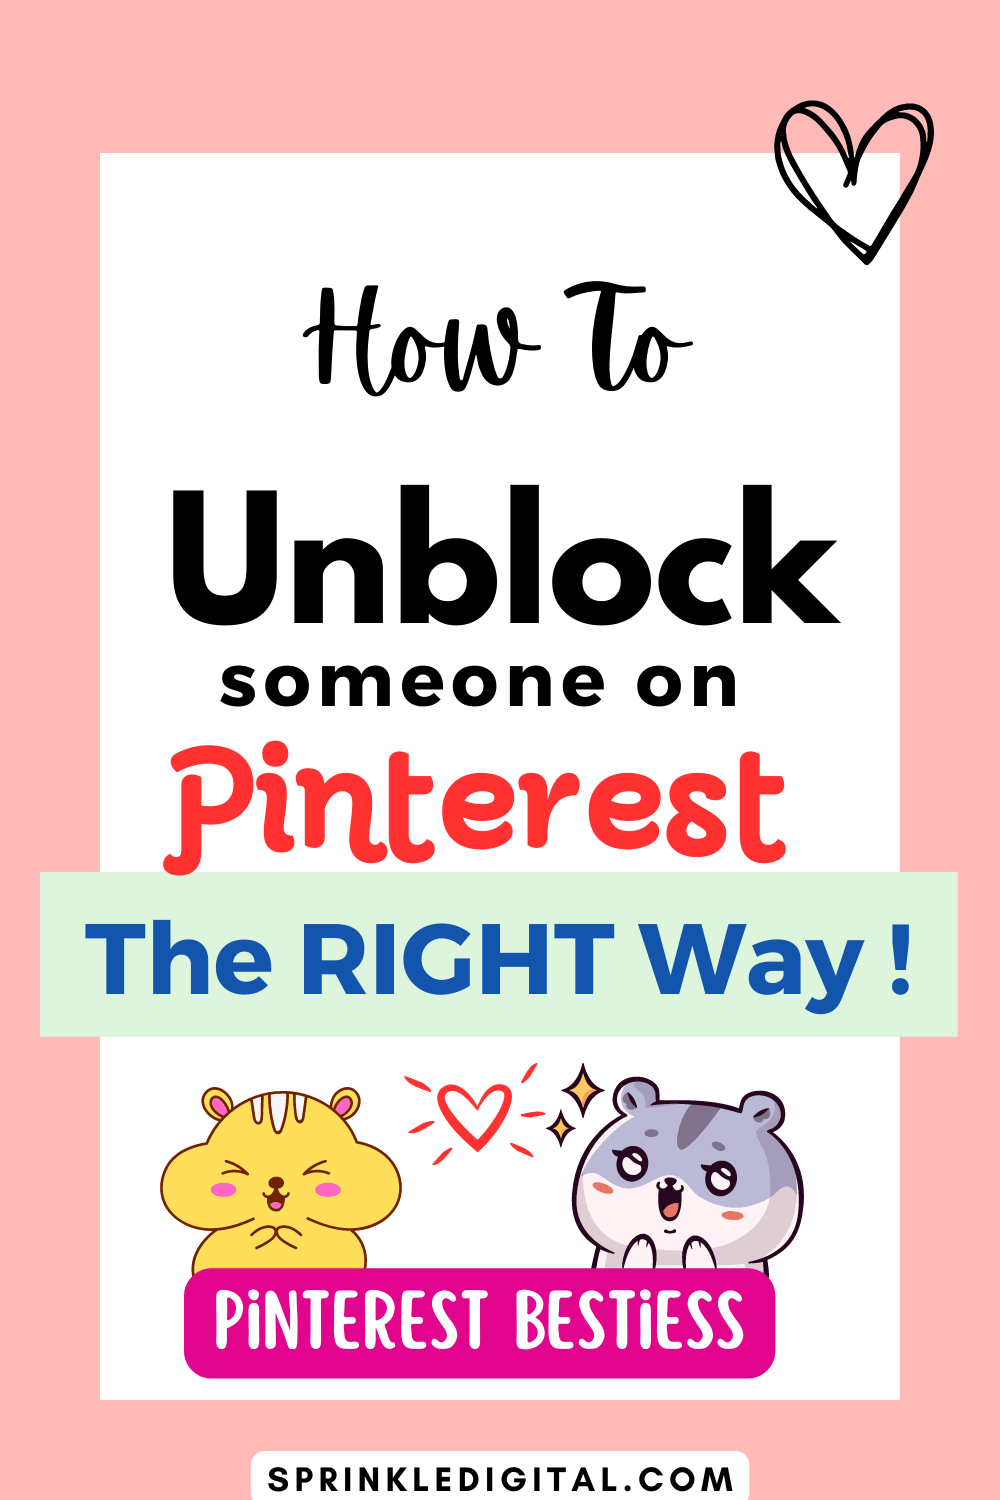 how to unblock someone on Pinterest